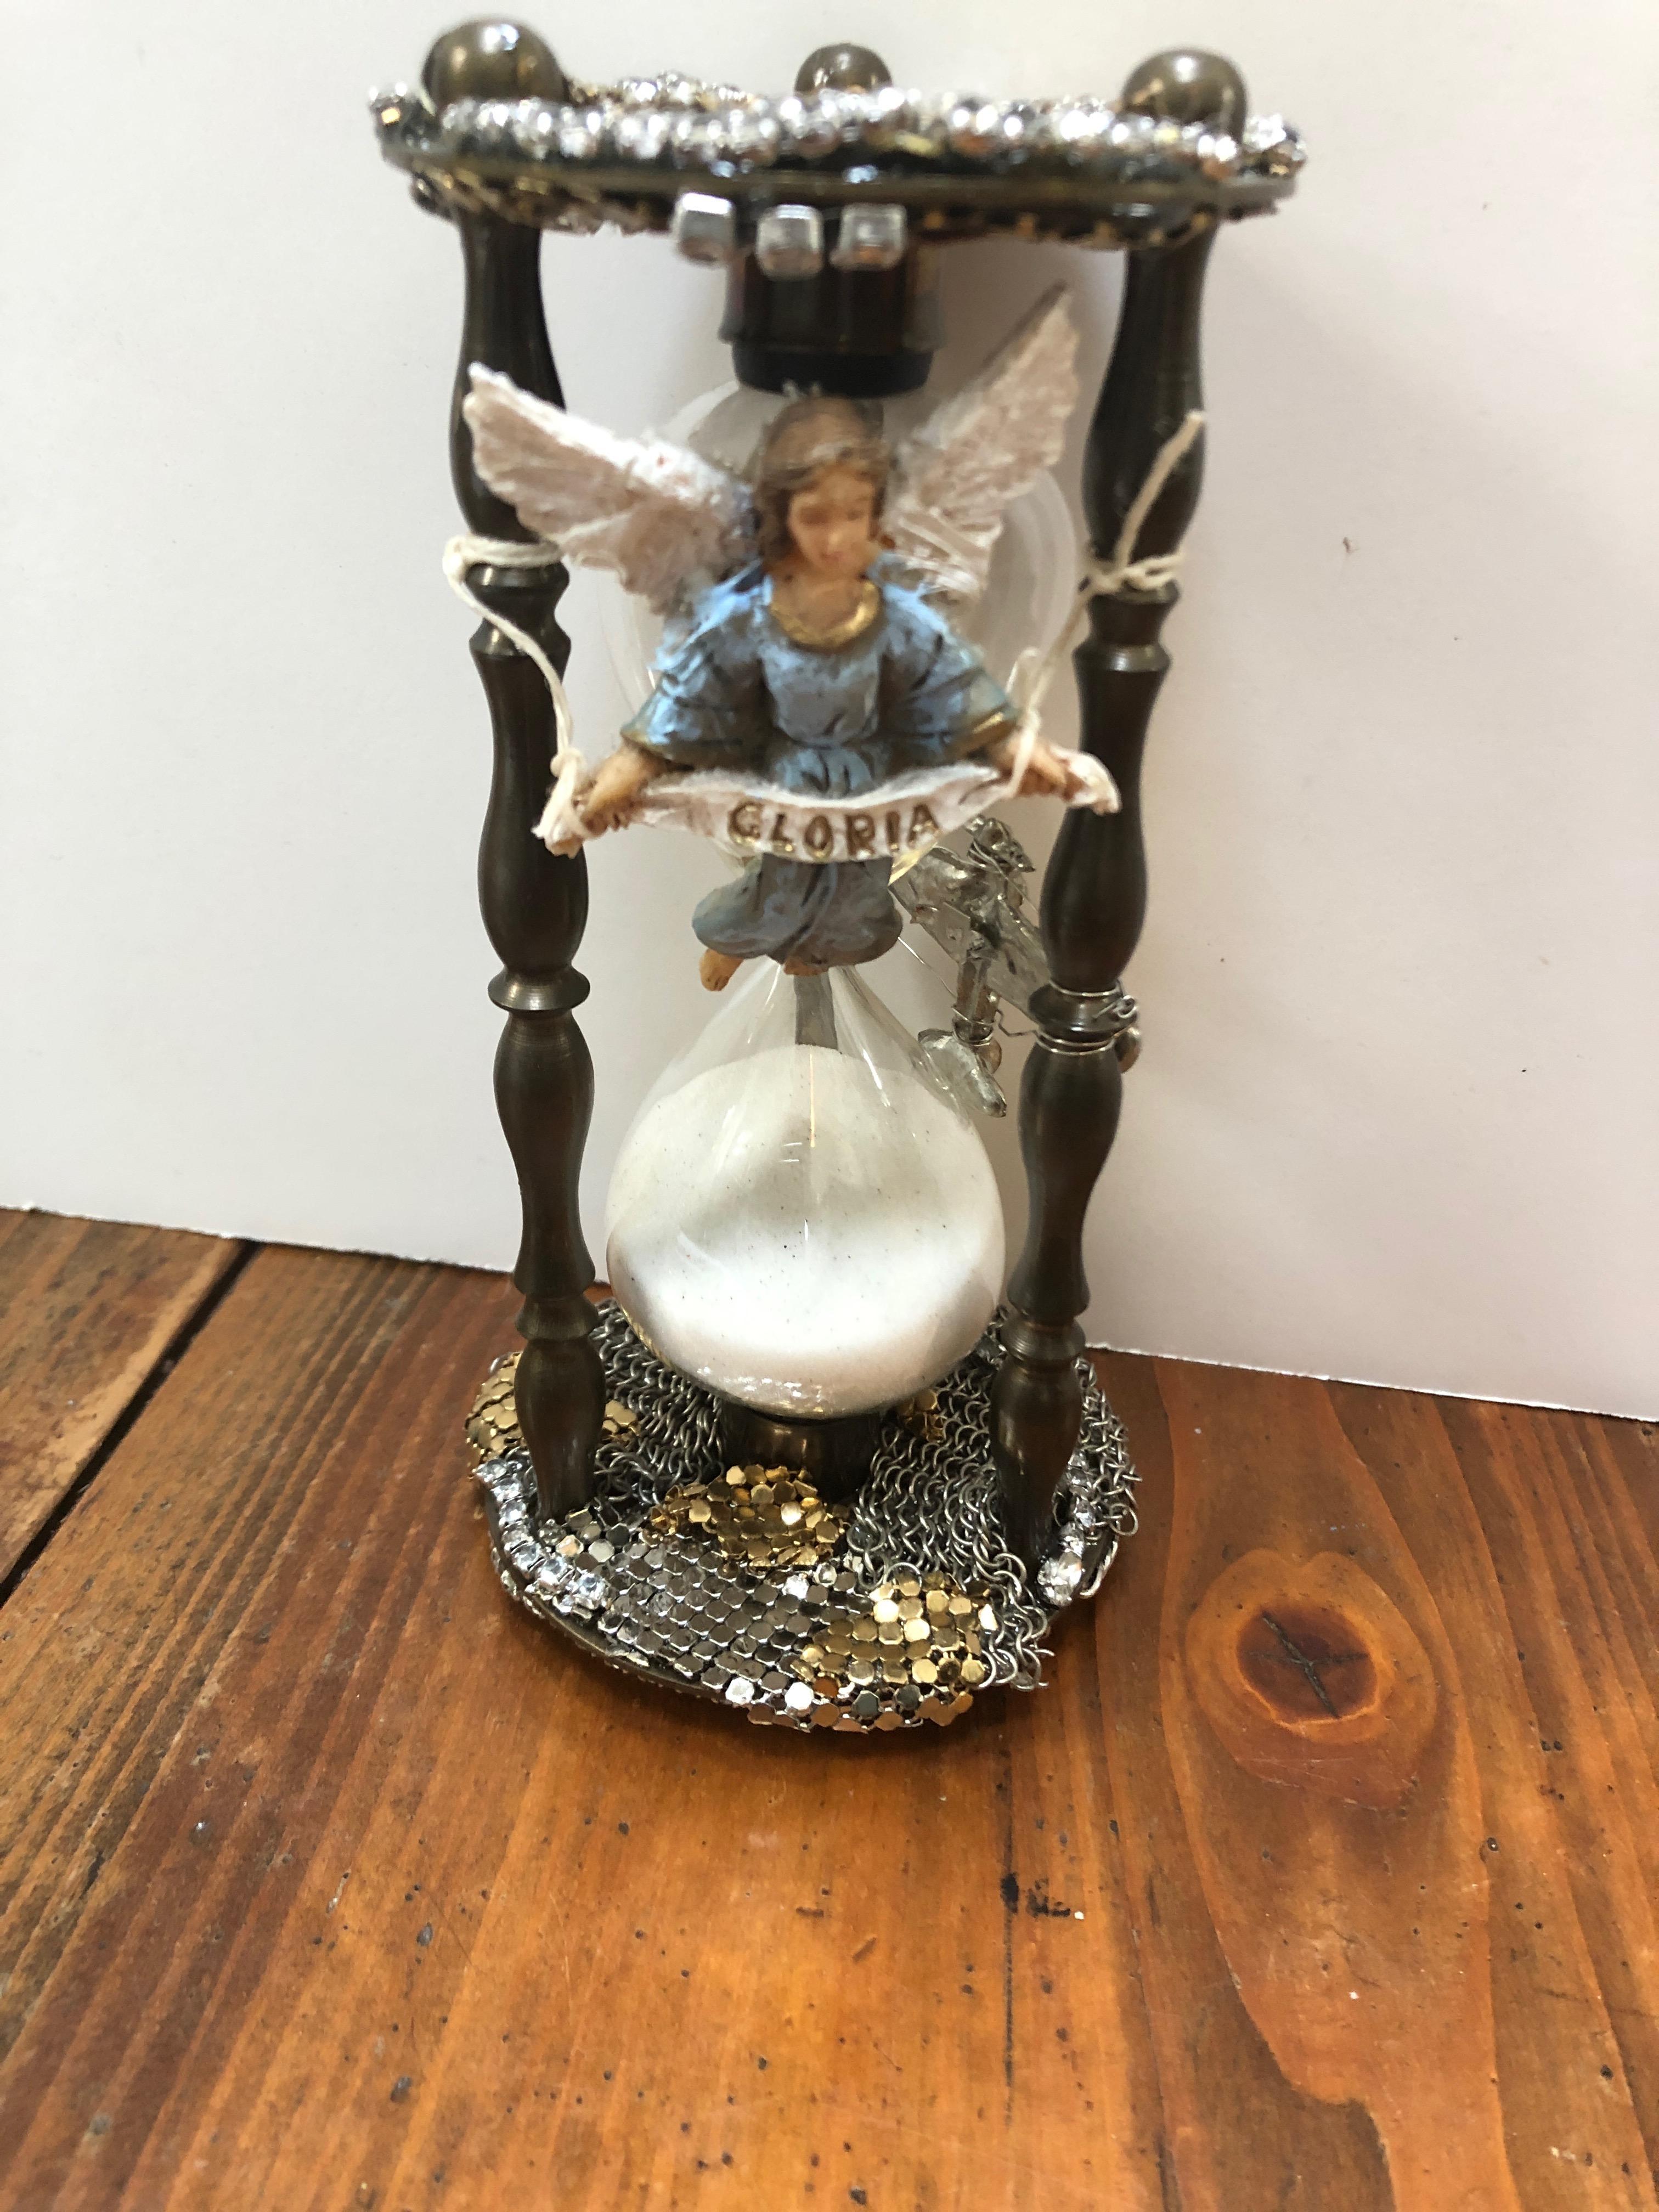 An extraordinary hourglass sculpture that's a visual poem to the notion of time passing, impermanence and the beauty of each moment. A multitude of powerful glittery overlapping media scavenged from vintage mesh purses, the angel from a Nativity,